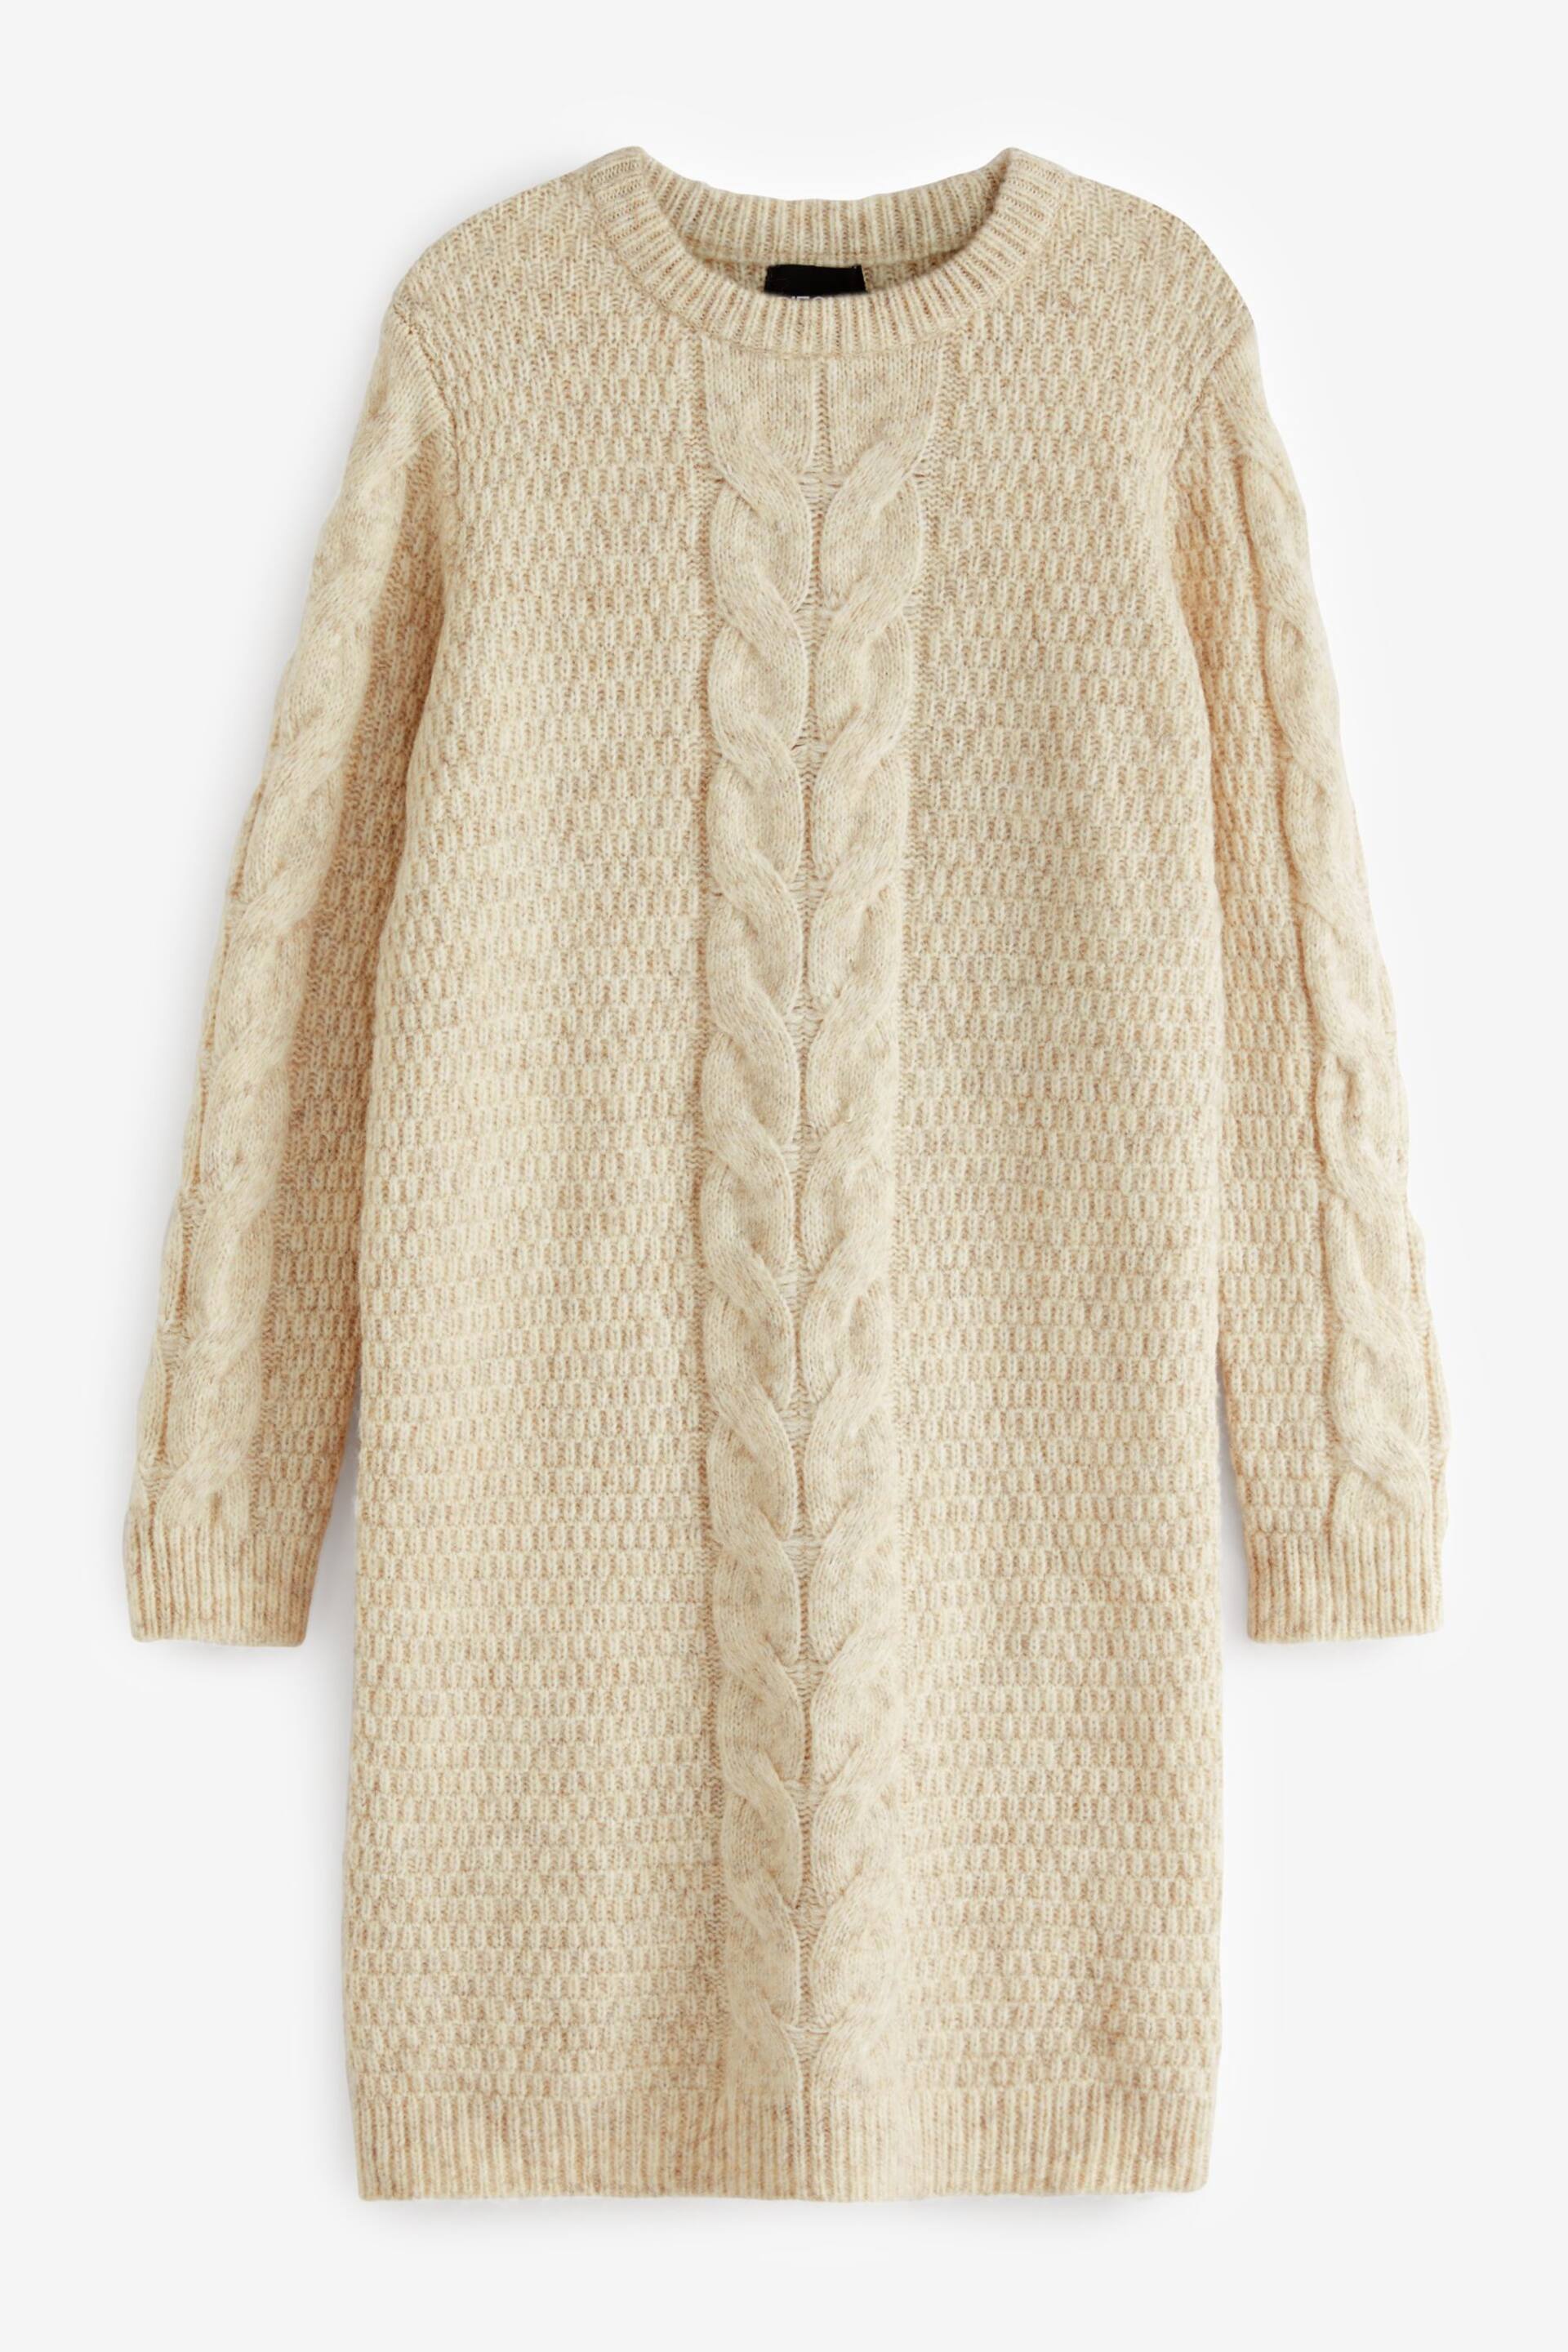 PIECES Cream Chunky Cable Knitted Jumper Dress - Image 5 of 5